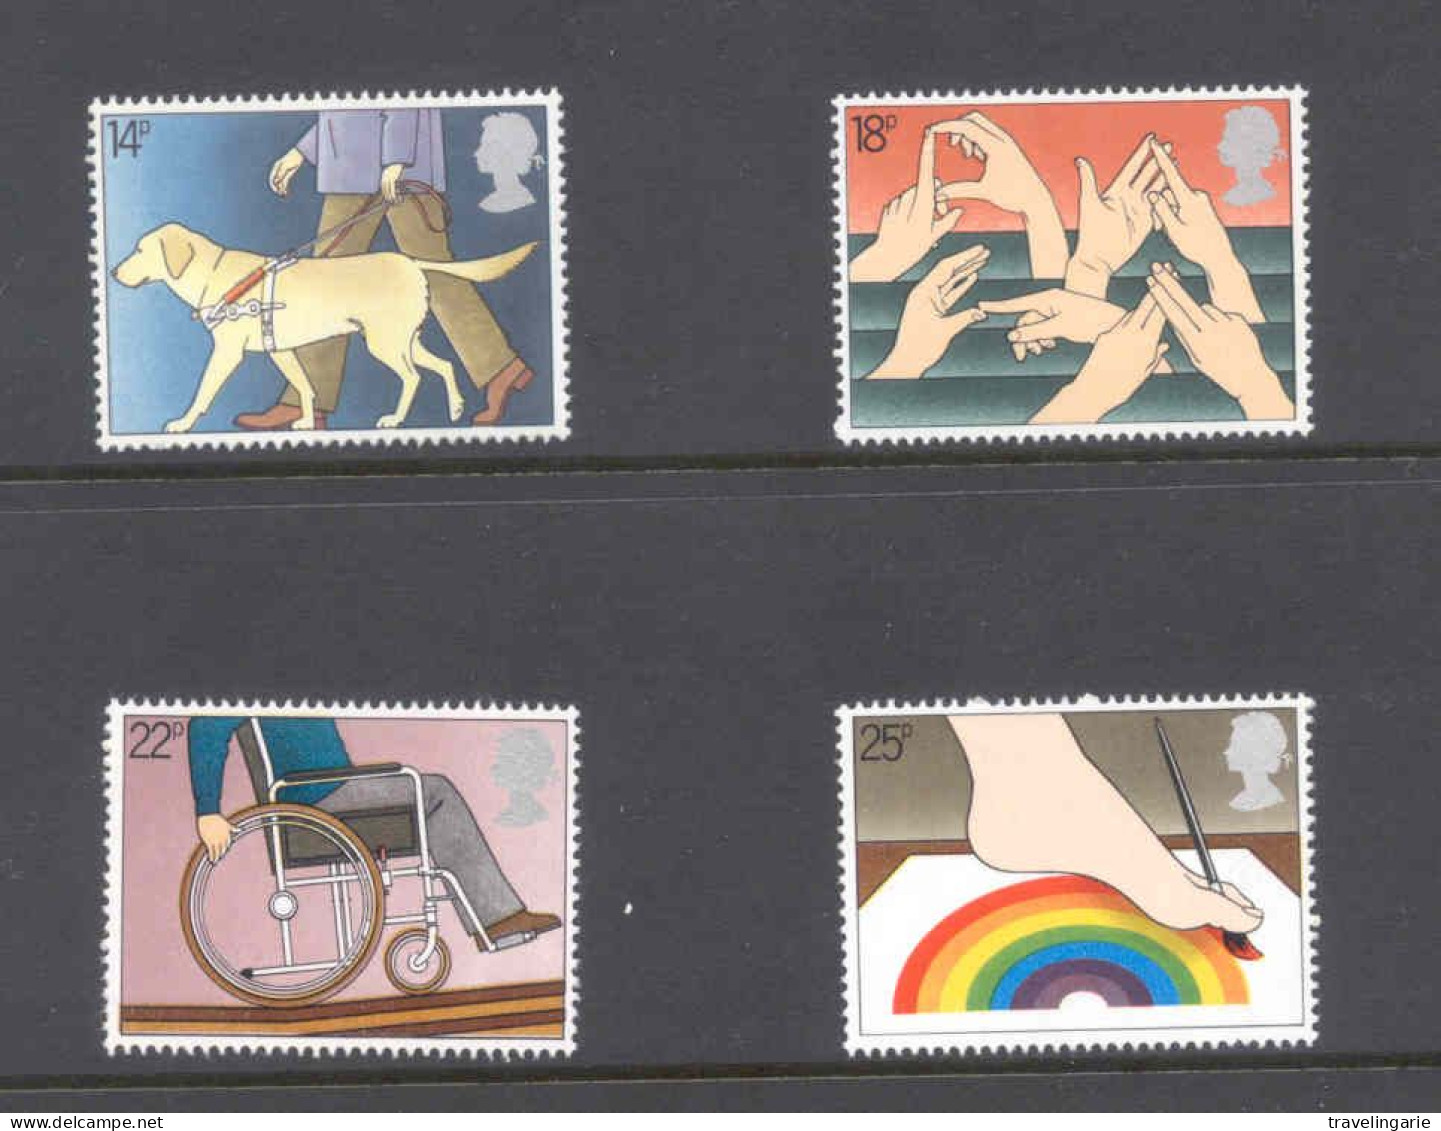 Great-Britain 1981 International Year Of The Disabled With Guide Dog MNH ** - Chiens